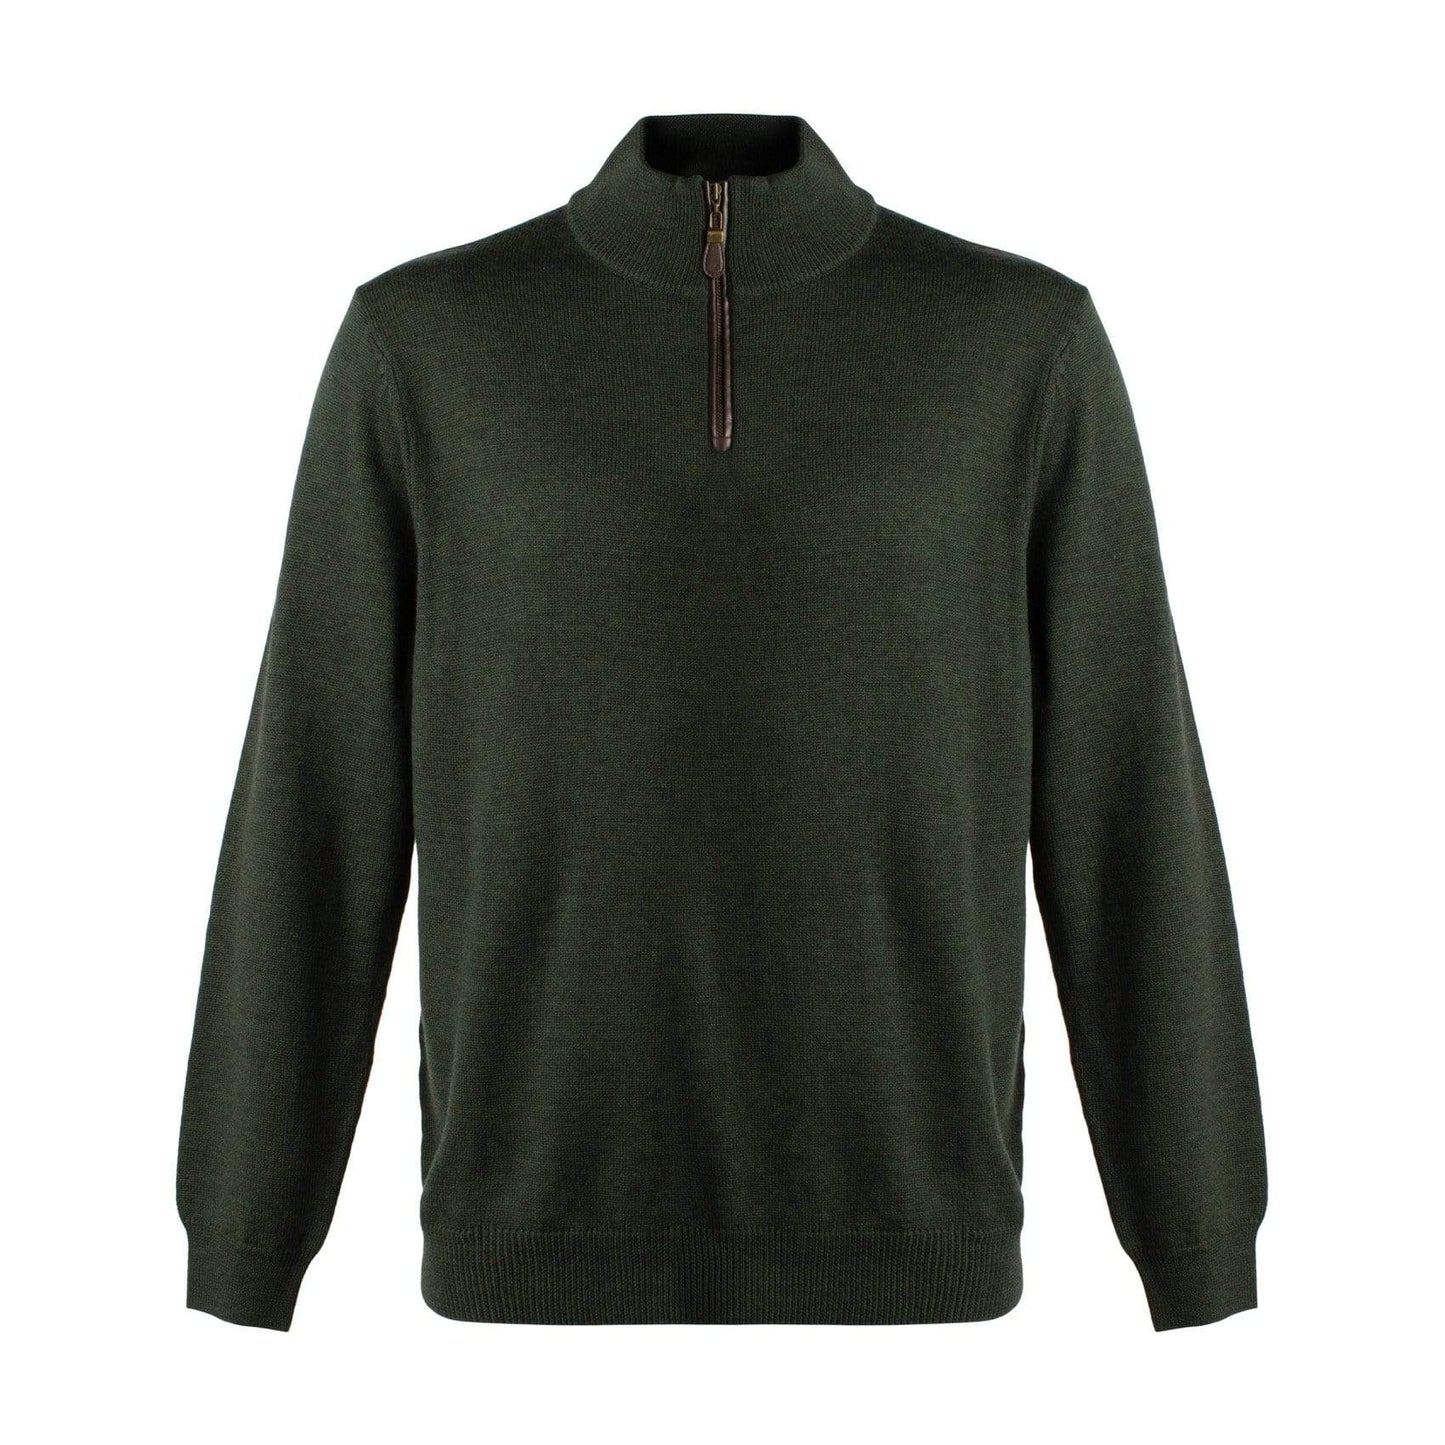 Viyella Elevate Your Wardrobe with the Versatile Quarter Zip Mockneck Sweaters in Extra Fine Merino Wool - Available in 10 Vibrant Colors